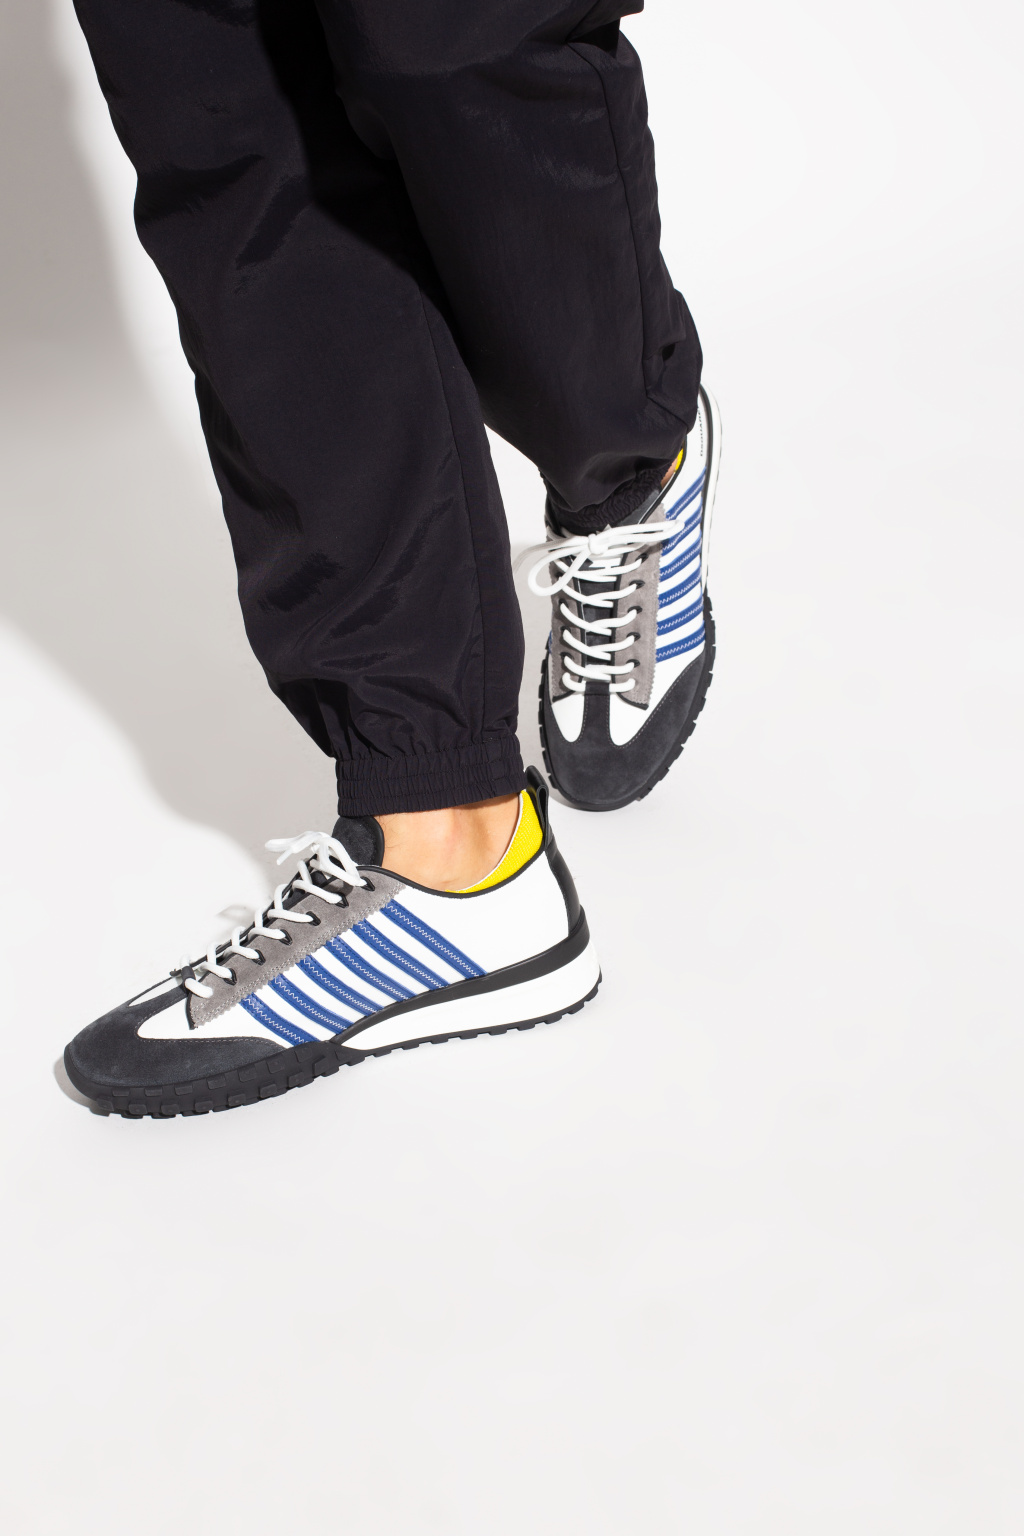 Dsquared2 sneakers of this season